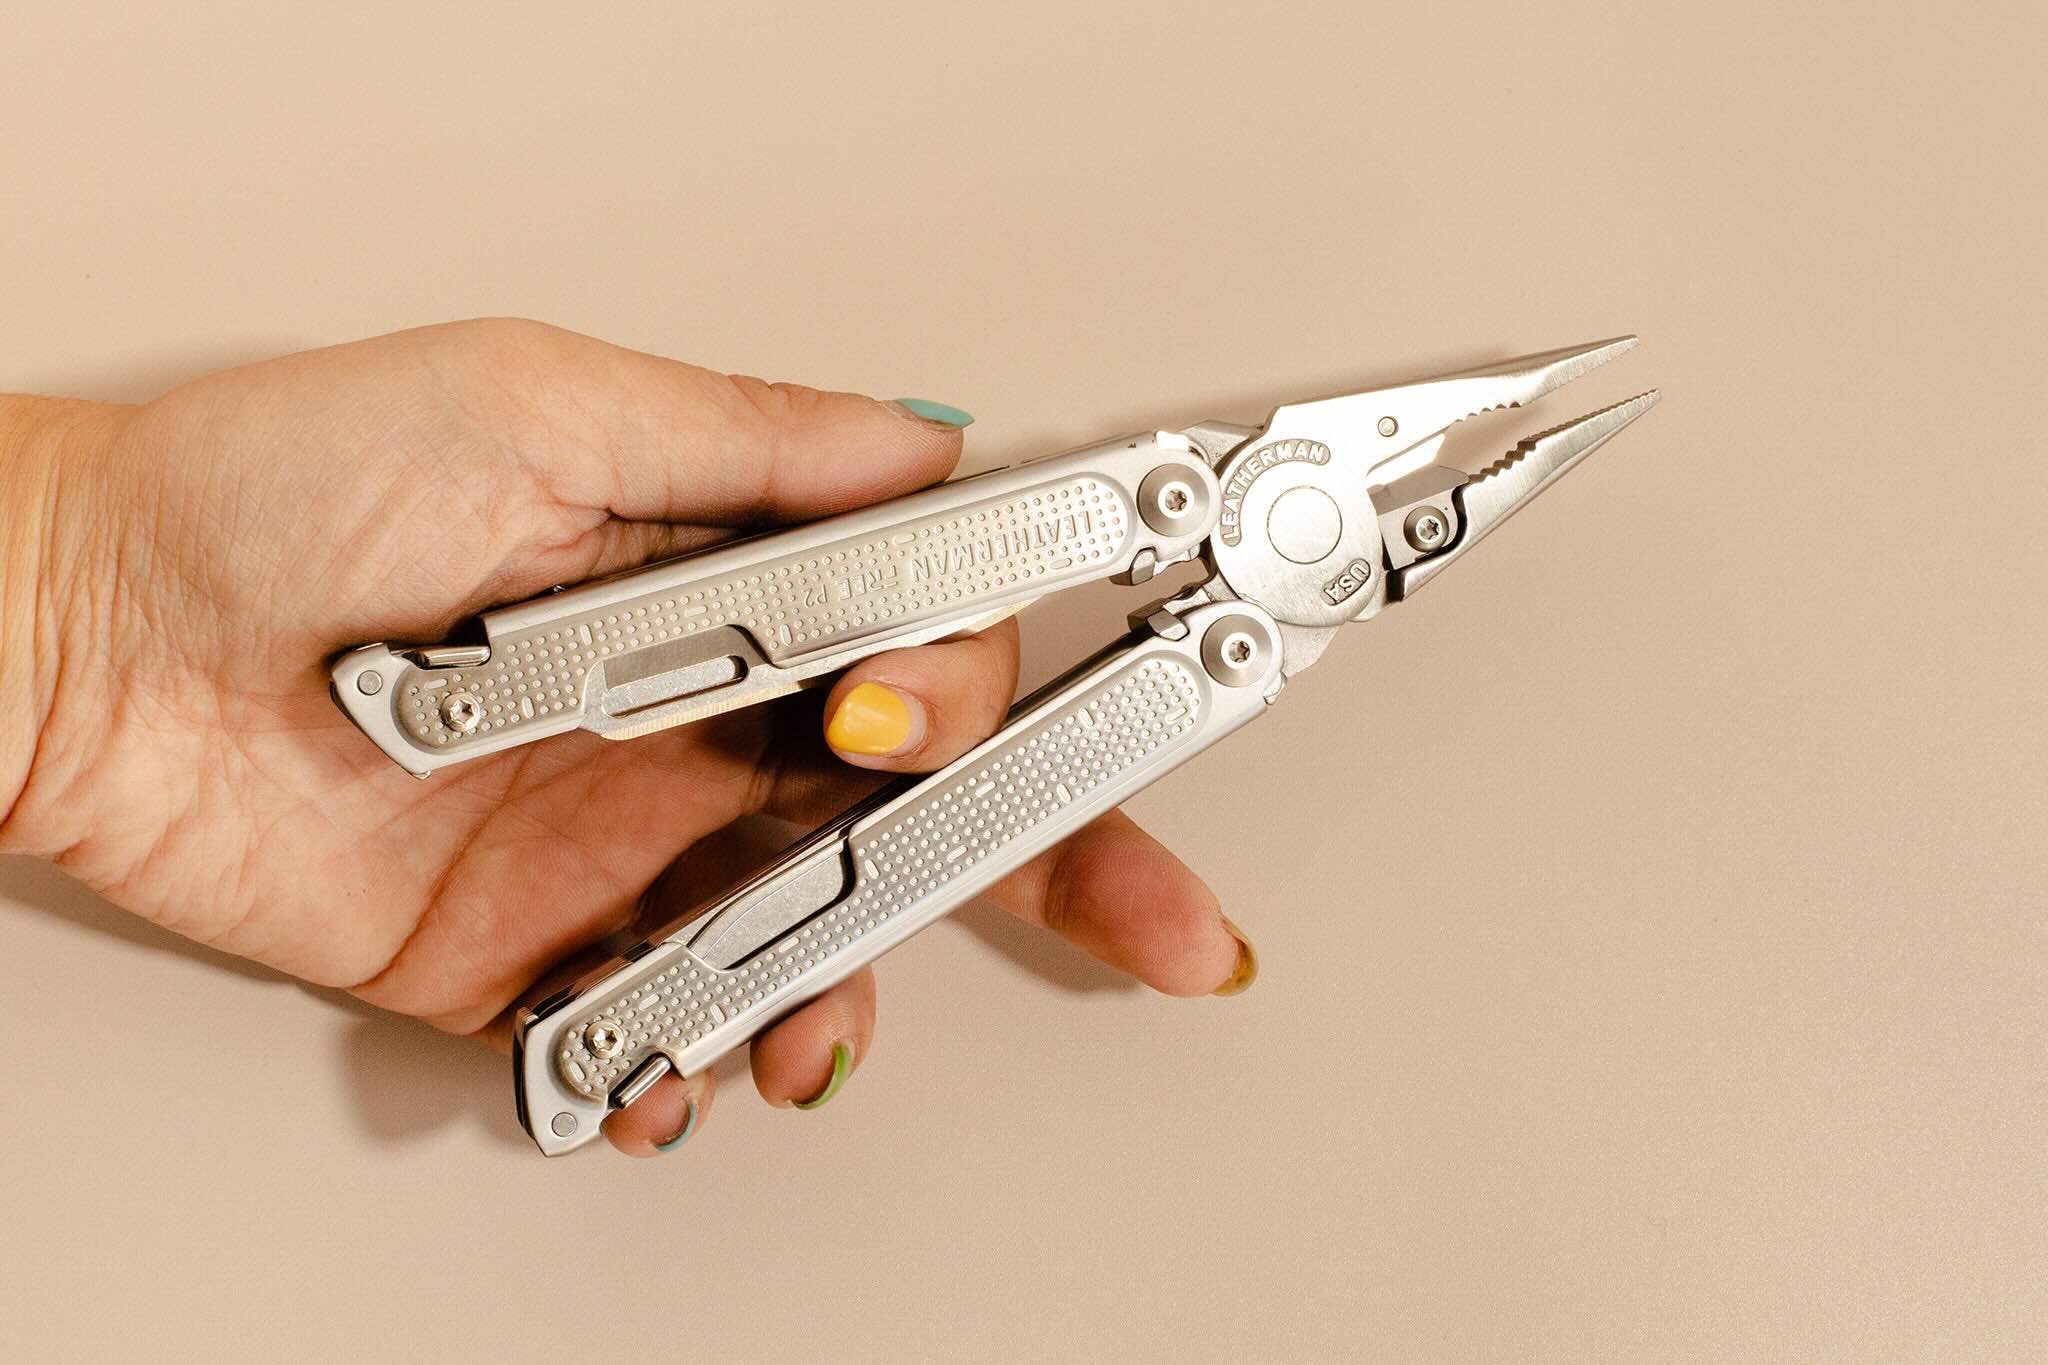 Top Multi-Tool Review: The Ultimate Versatile Tool for Every Task